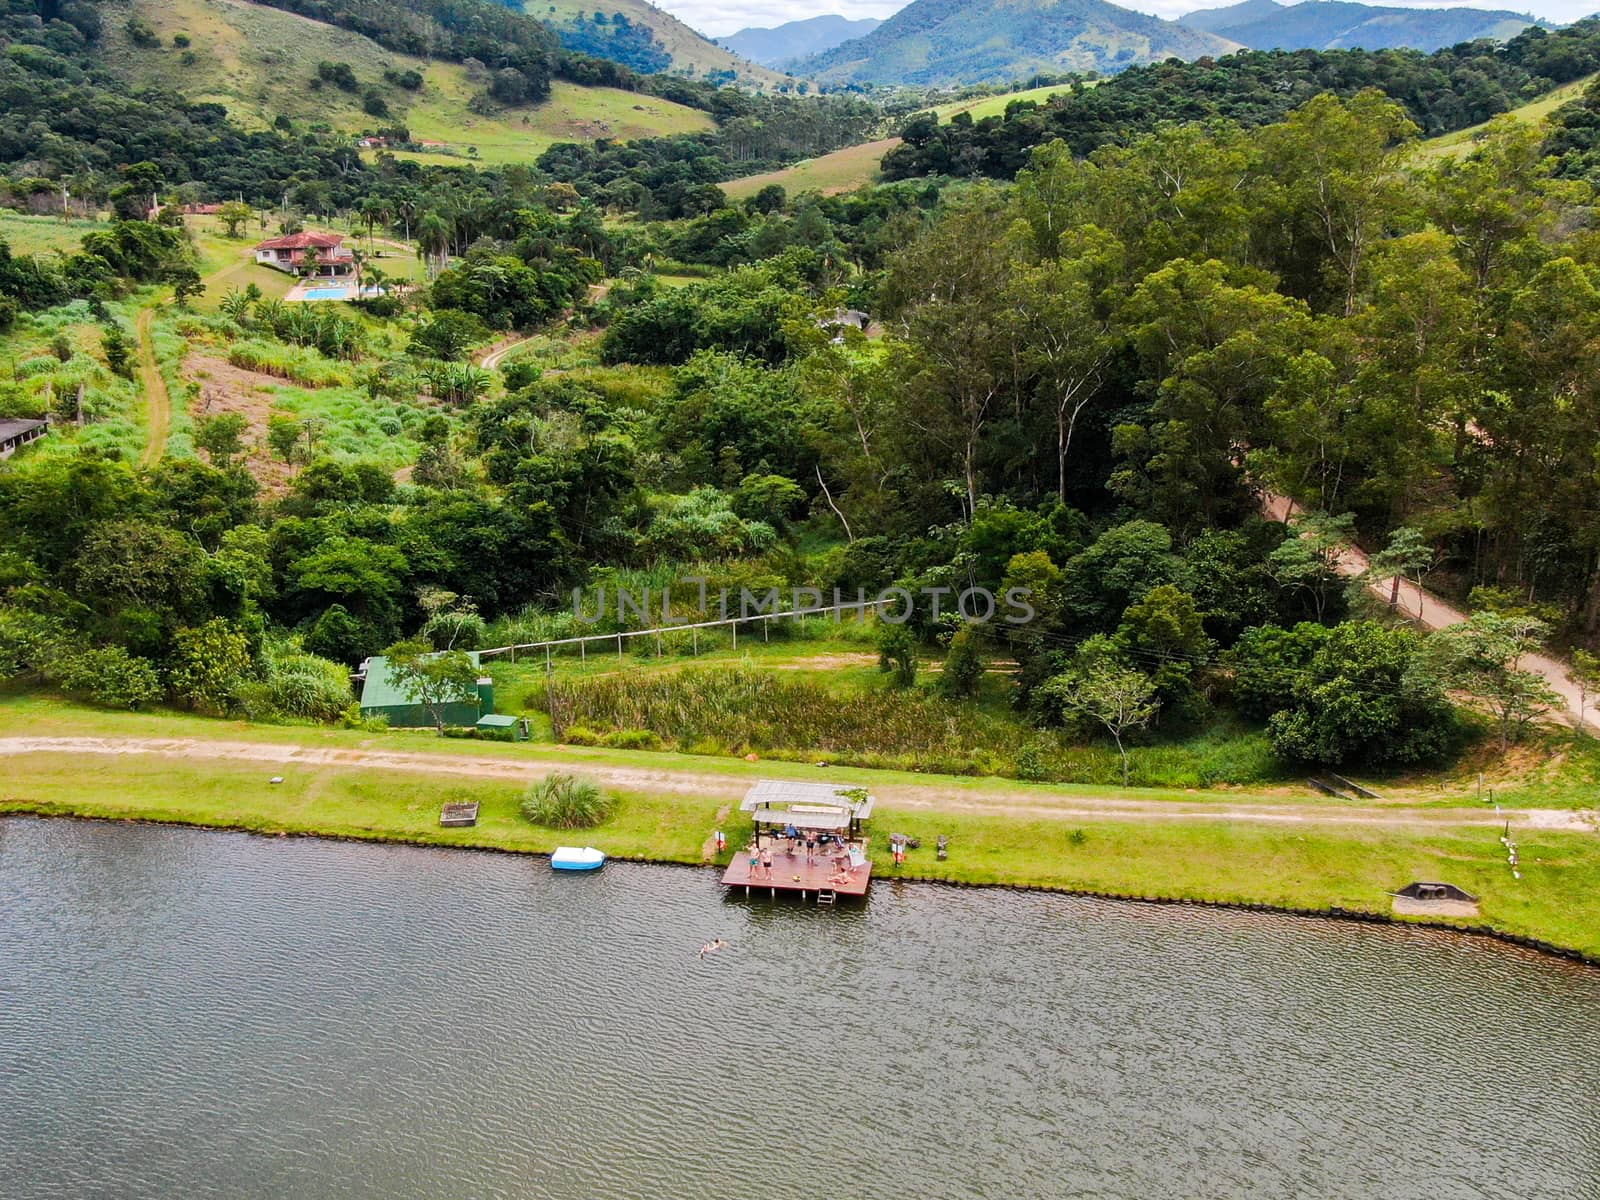 Aerial view of little wood cabana next the lake in the valley, with family enjoying relax moment, swimming and fishing. Monte Alegre Do Sul, Brazil. 